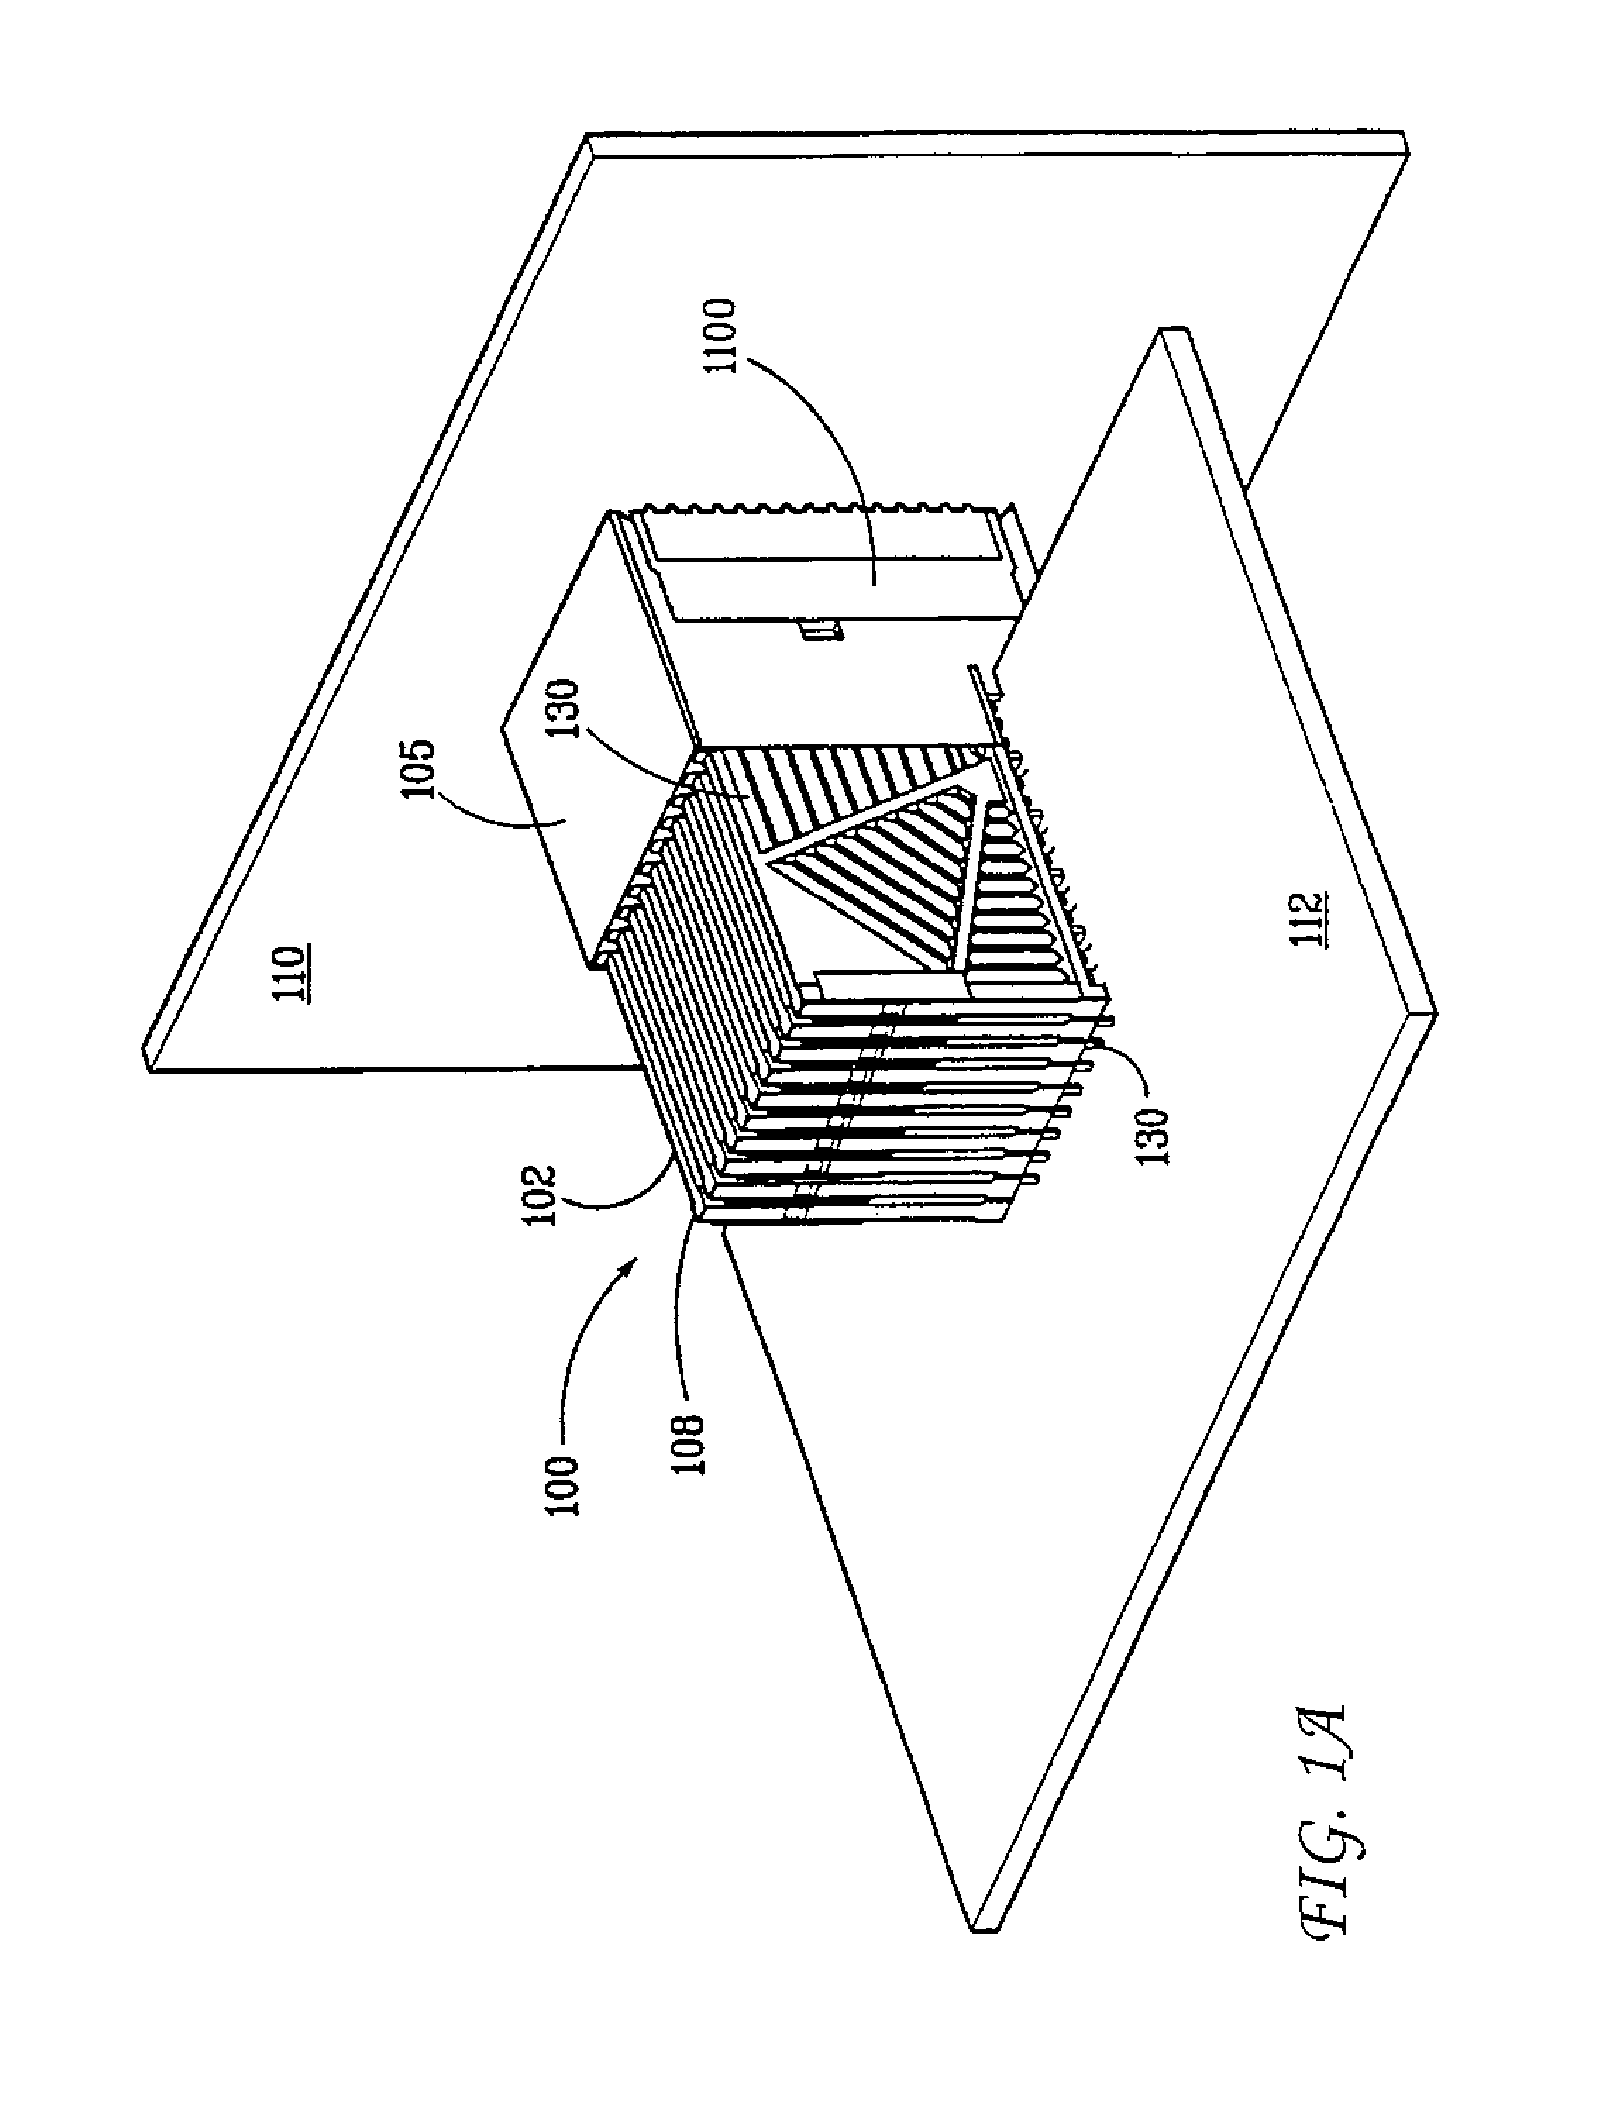 Electrical connector with load bearing features